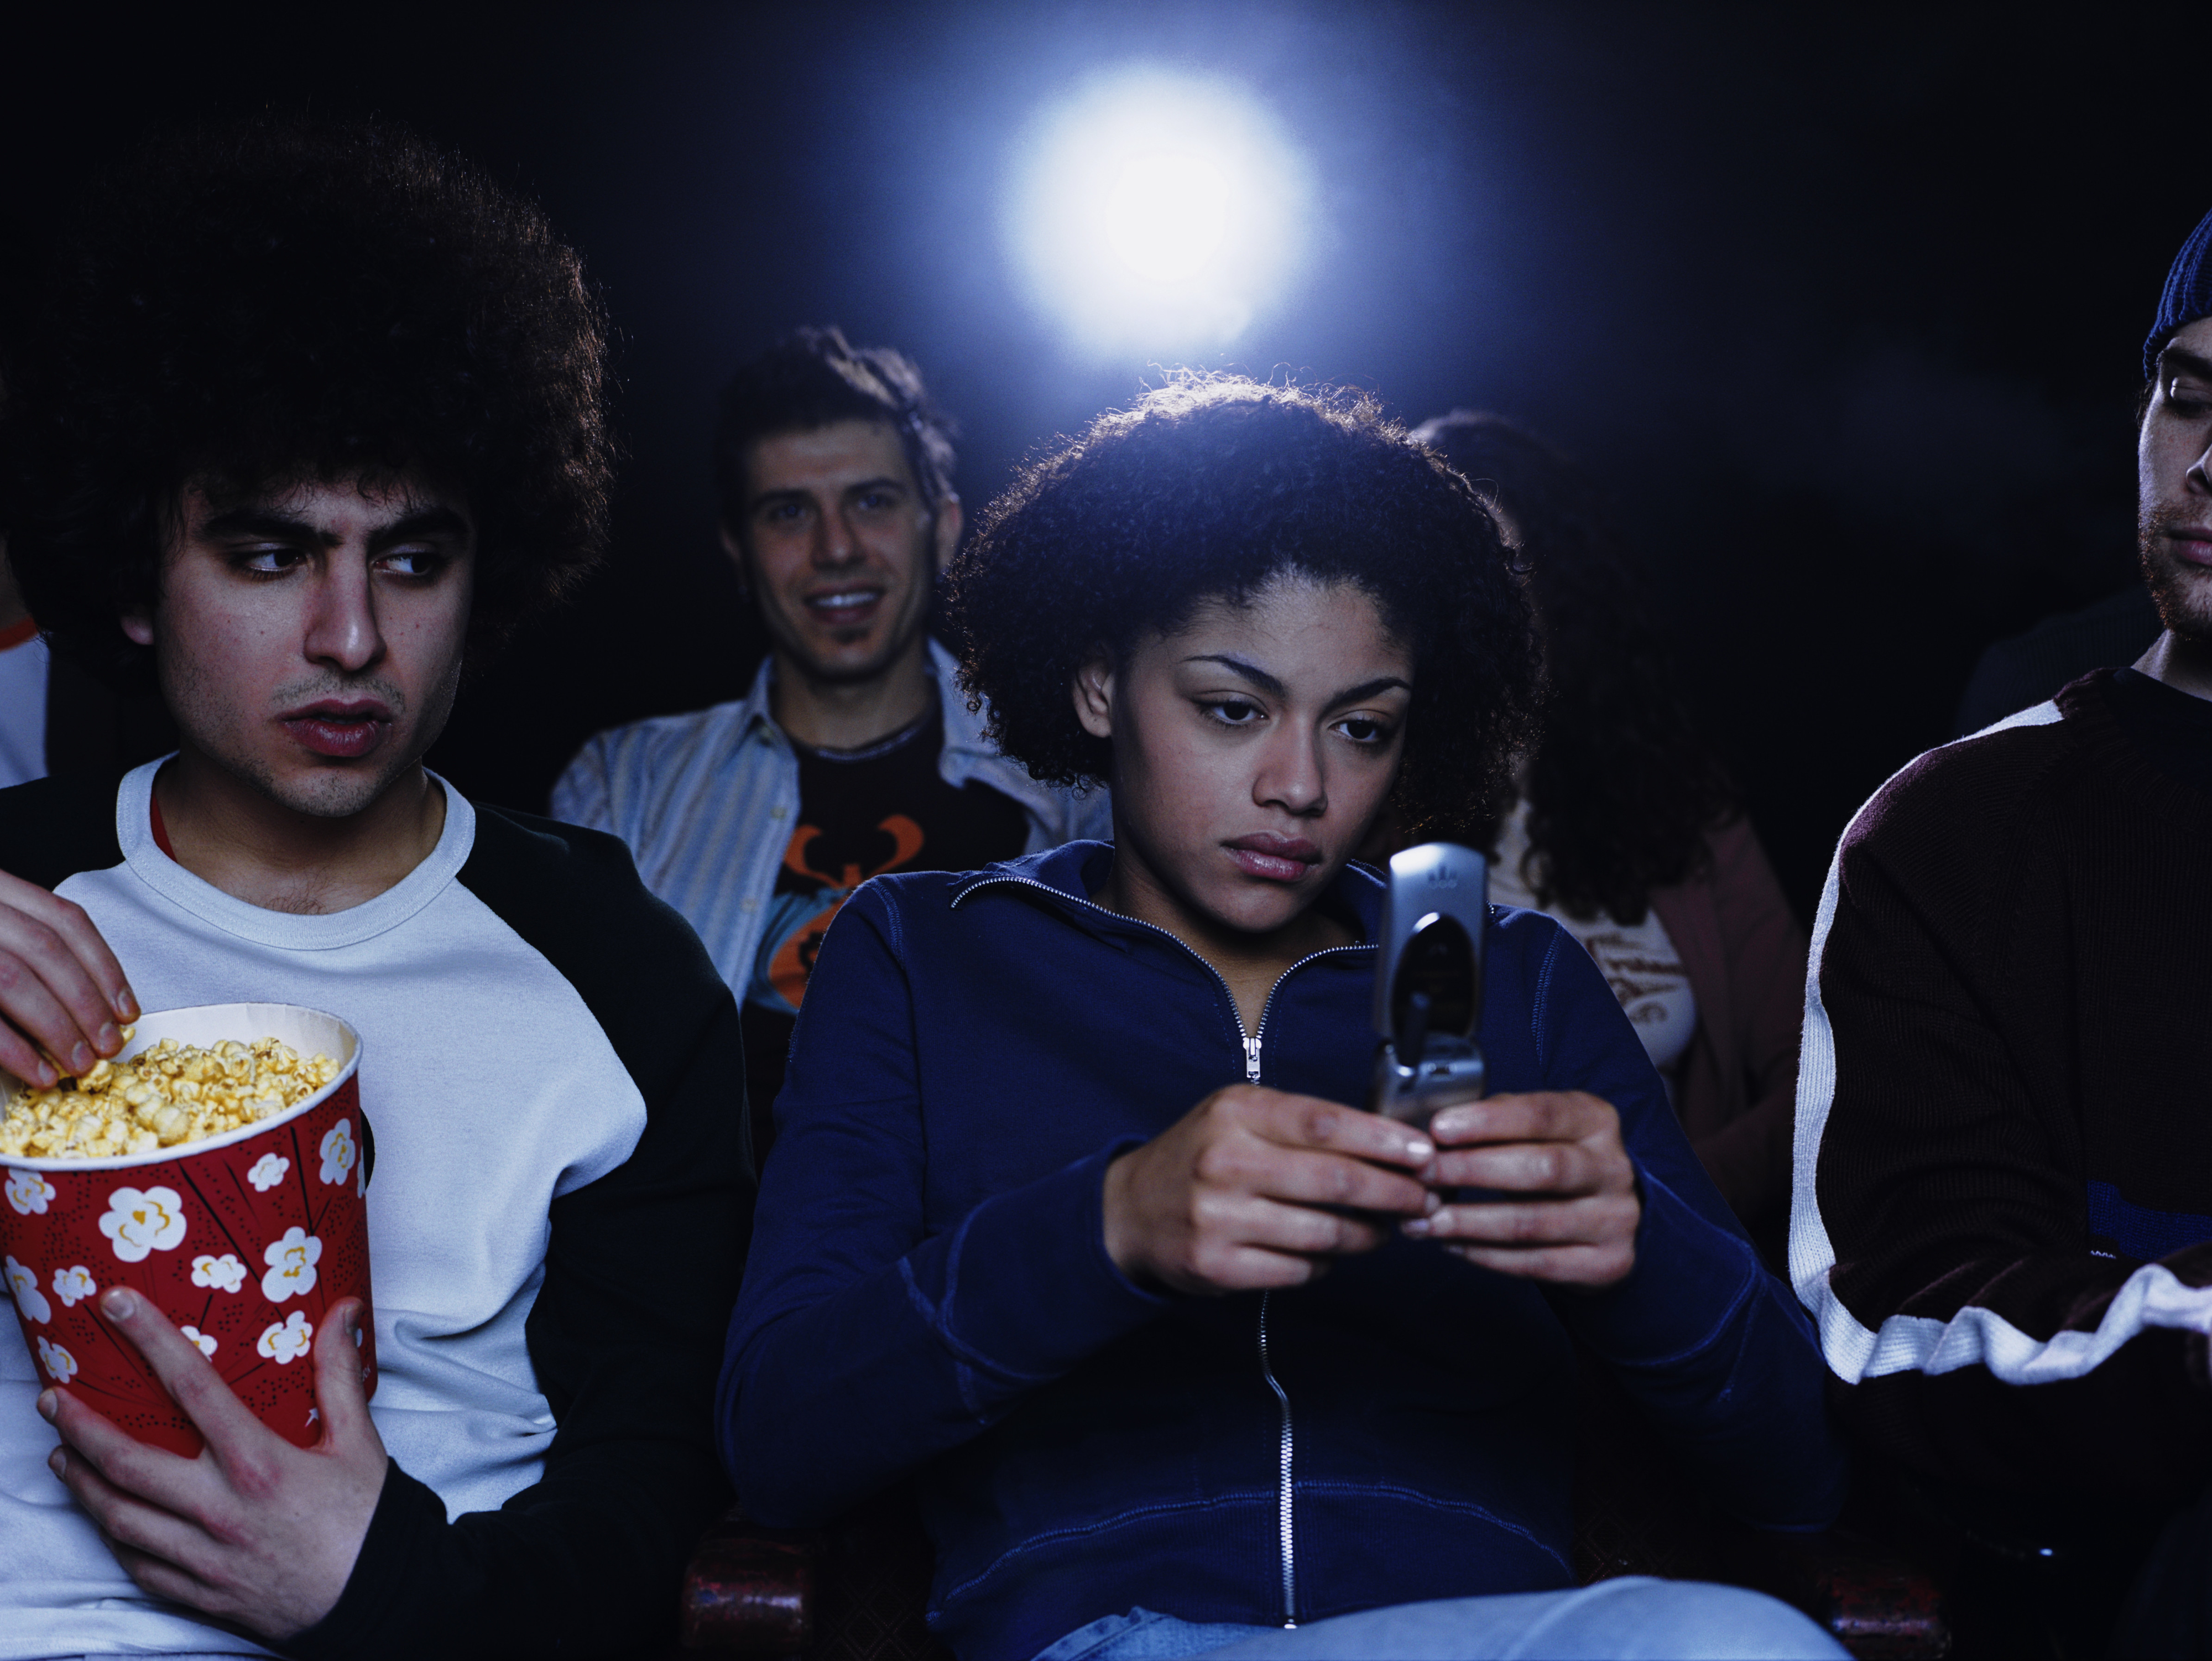 People in a dark cinema; one is focused on their phone screen, others watch the film, one with popcorn